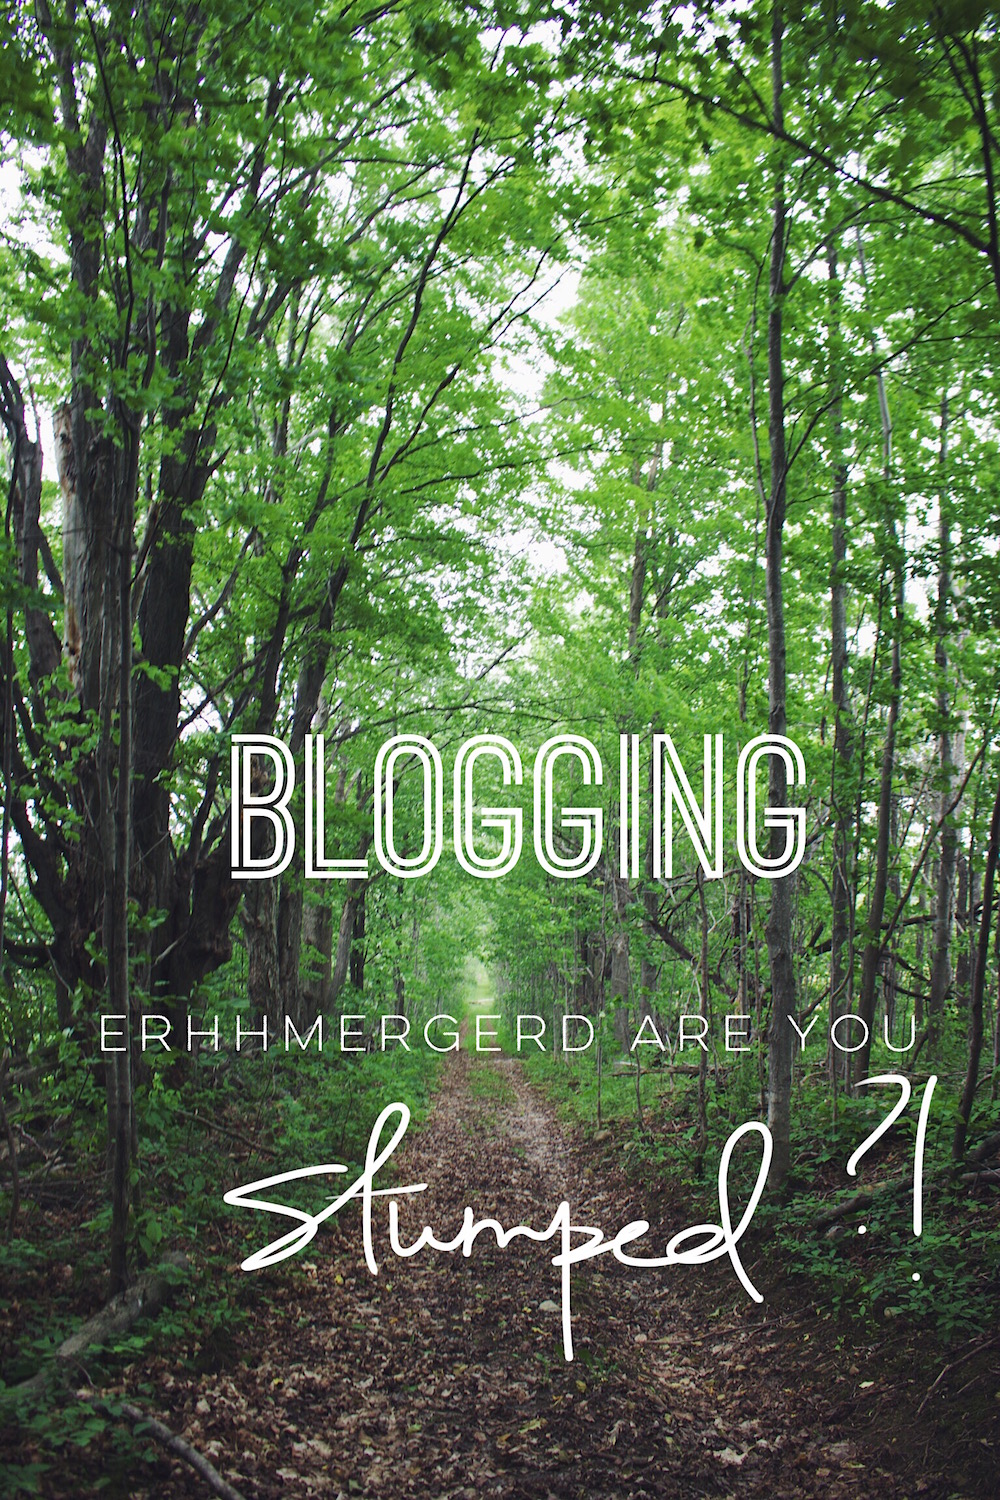 Tips & tricks for being an epic blogger! A must read!